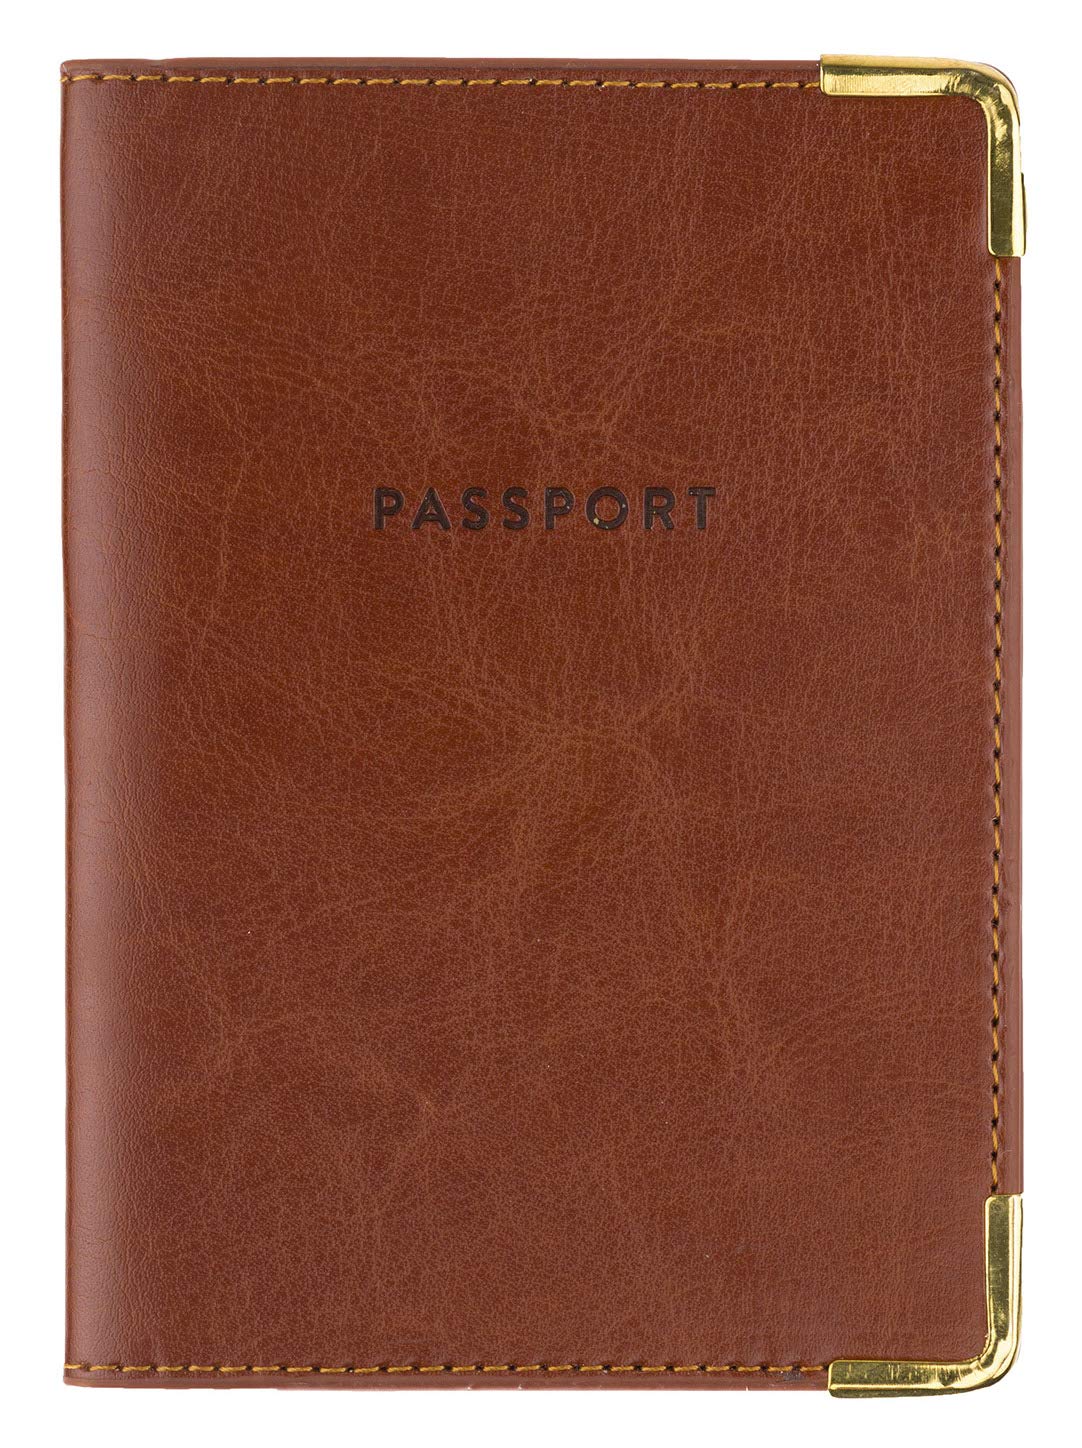 Eccolo Travel Passport Cover Case with Document Holder Storage Pocket